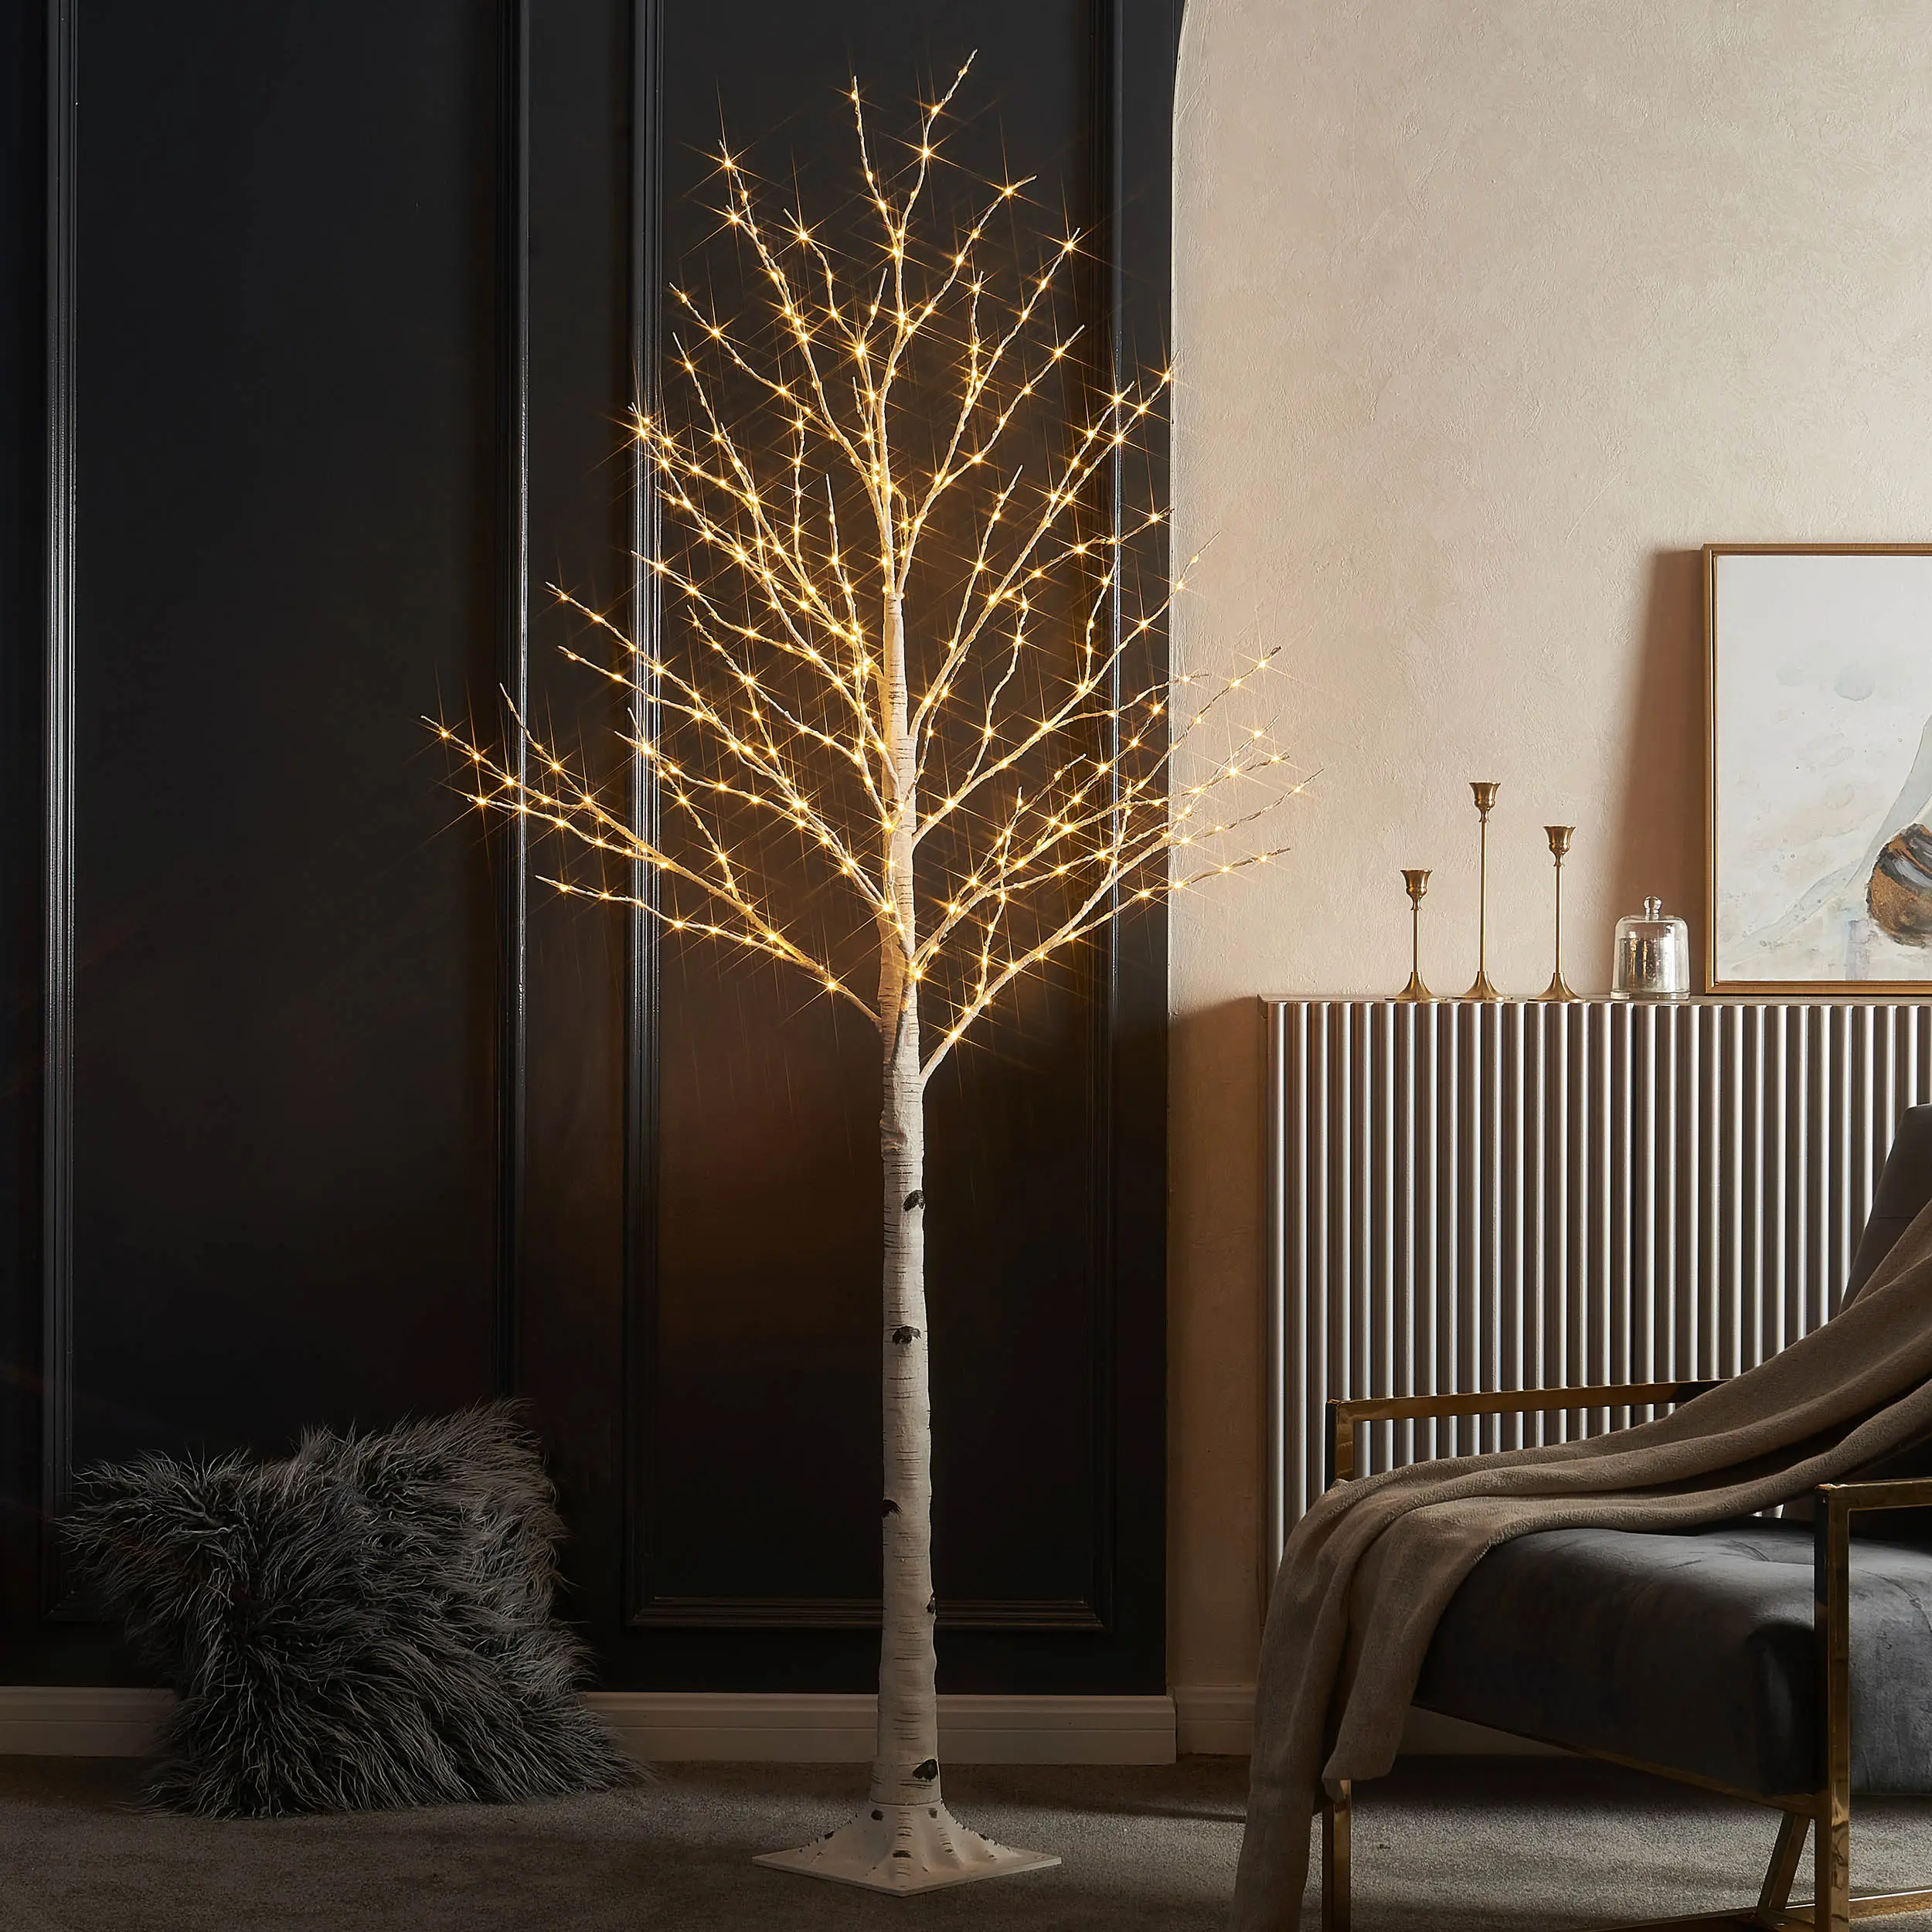 Prelit Twig Birch Tree with Fairy Lights 6FT 330 LED for Indoor Outdoor Home and Christmas Holiday Decoration